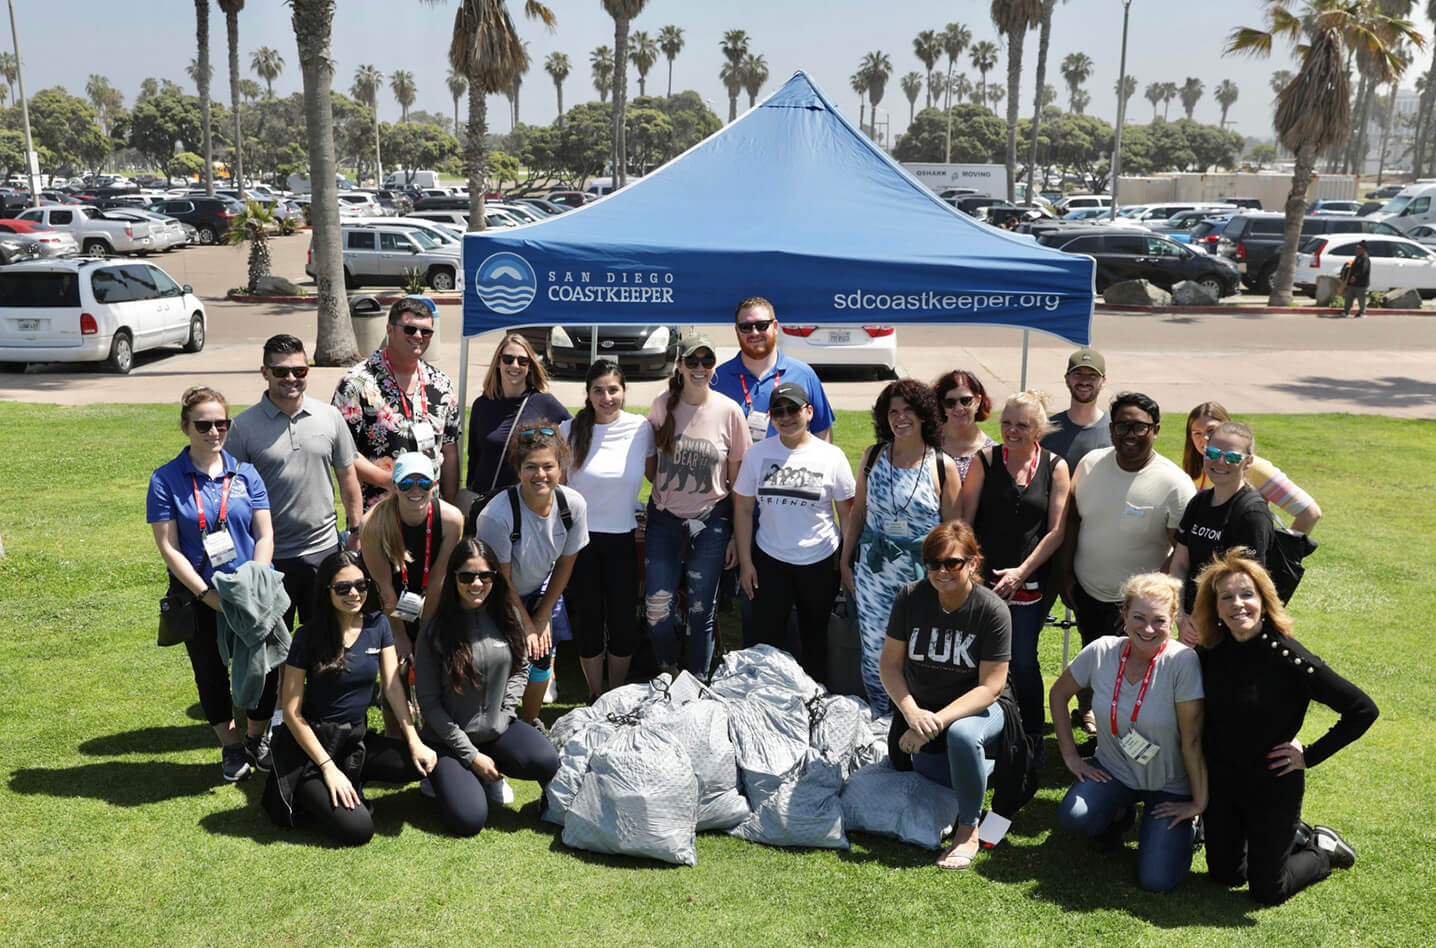 NBAA YoPro's 'Day of Service' beach cleanup